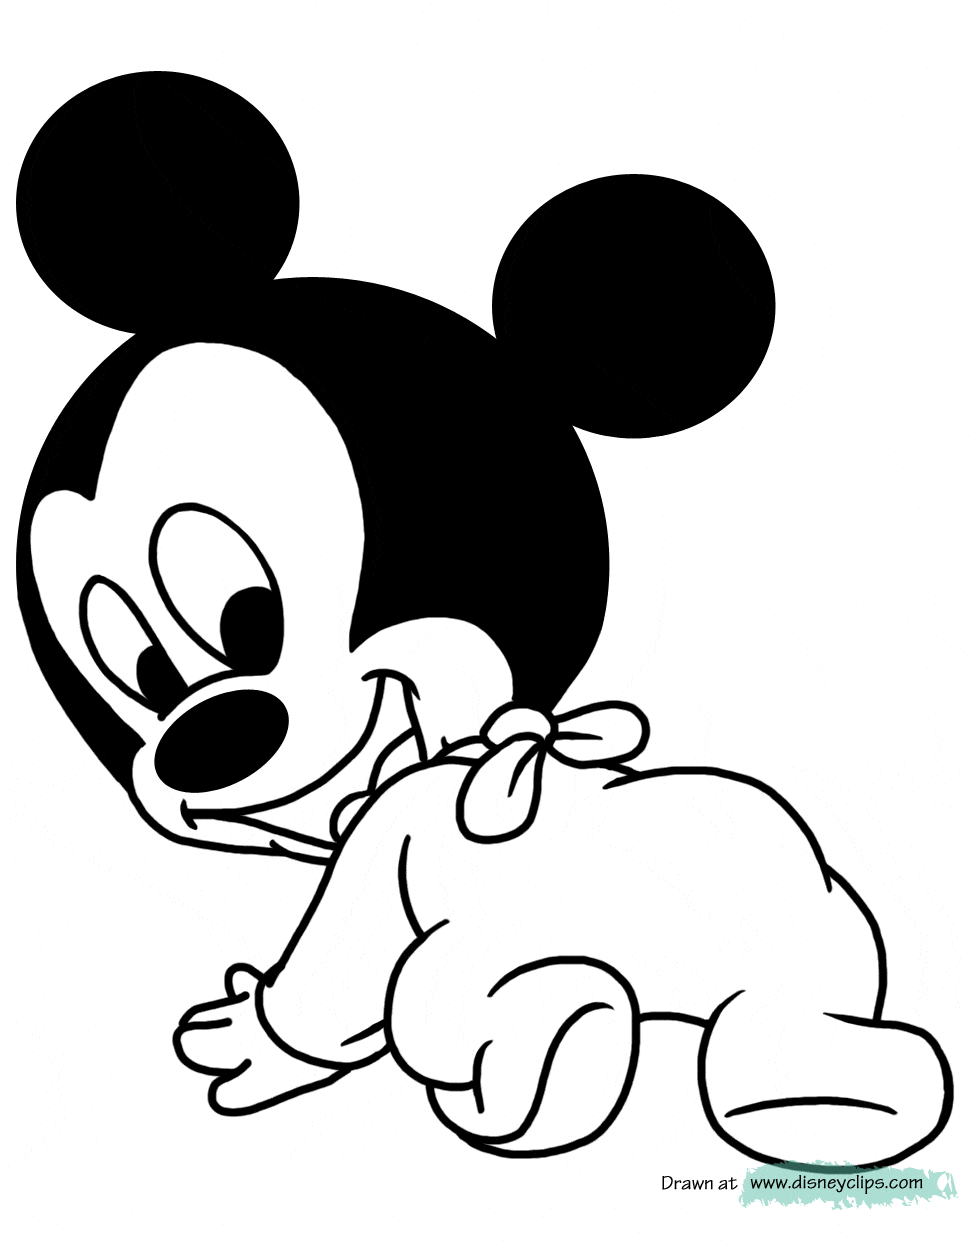 Disney Babies Coloring Pages | Disneyclips.com
 Cute Baby Mickey Mouse Drawings